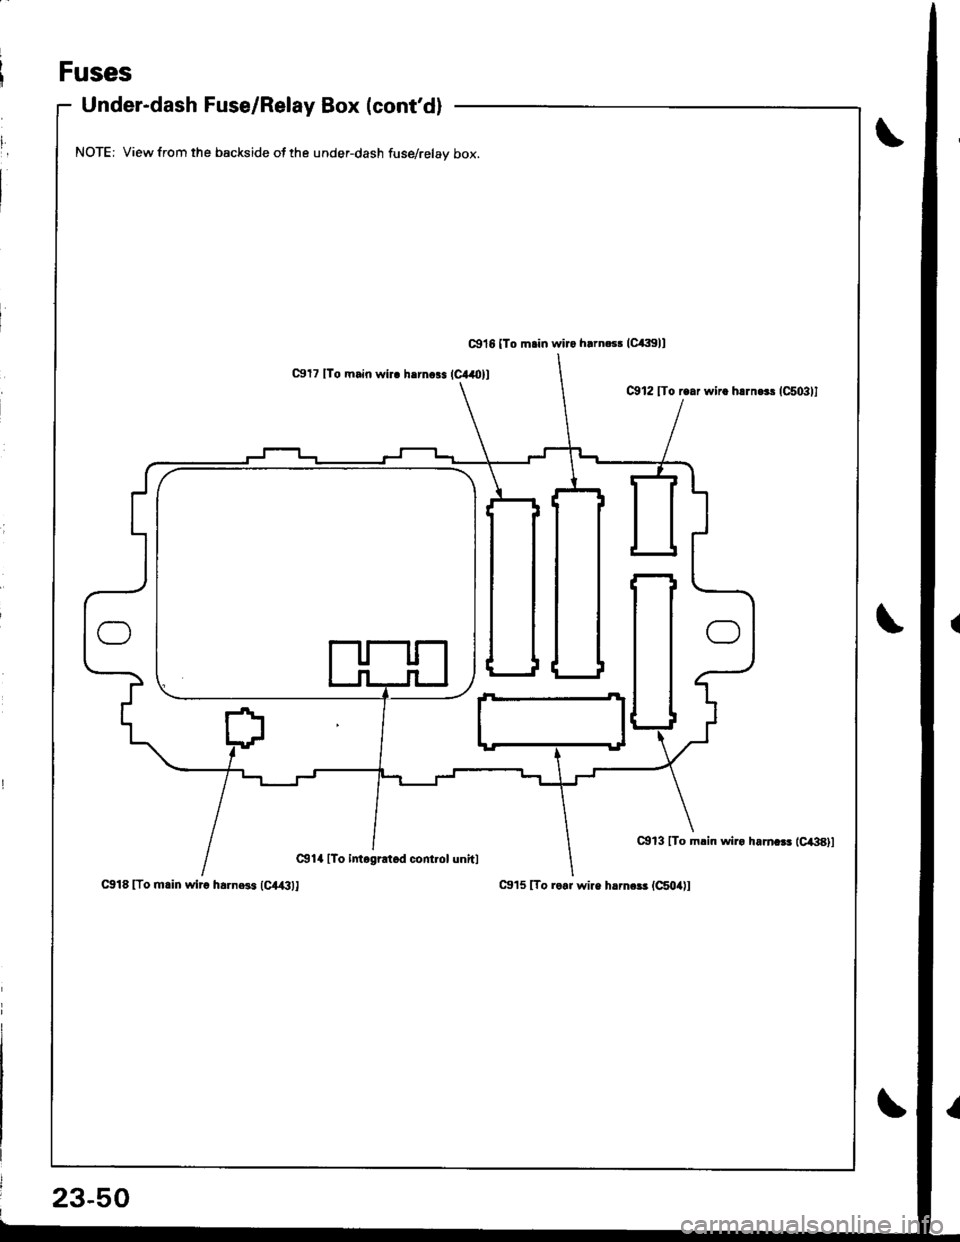 HONDA INTEGRA 1998 4.G Workshop Manual Fuses
Under-dash Fuse/Relay Box (contd)
NOTE; View from the backside of the under-dash fuse/relav box.
C9l7 lTo main wir. hrrn63 (C+Oll
C!14 [To intogrrtod cont.ol unhl
Cll8lTo m.in wiro h.rnegr (C,l